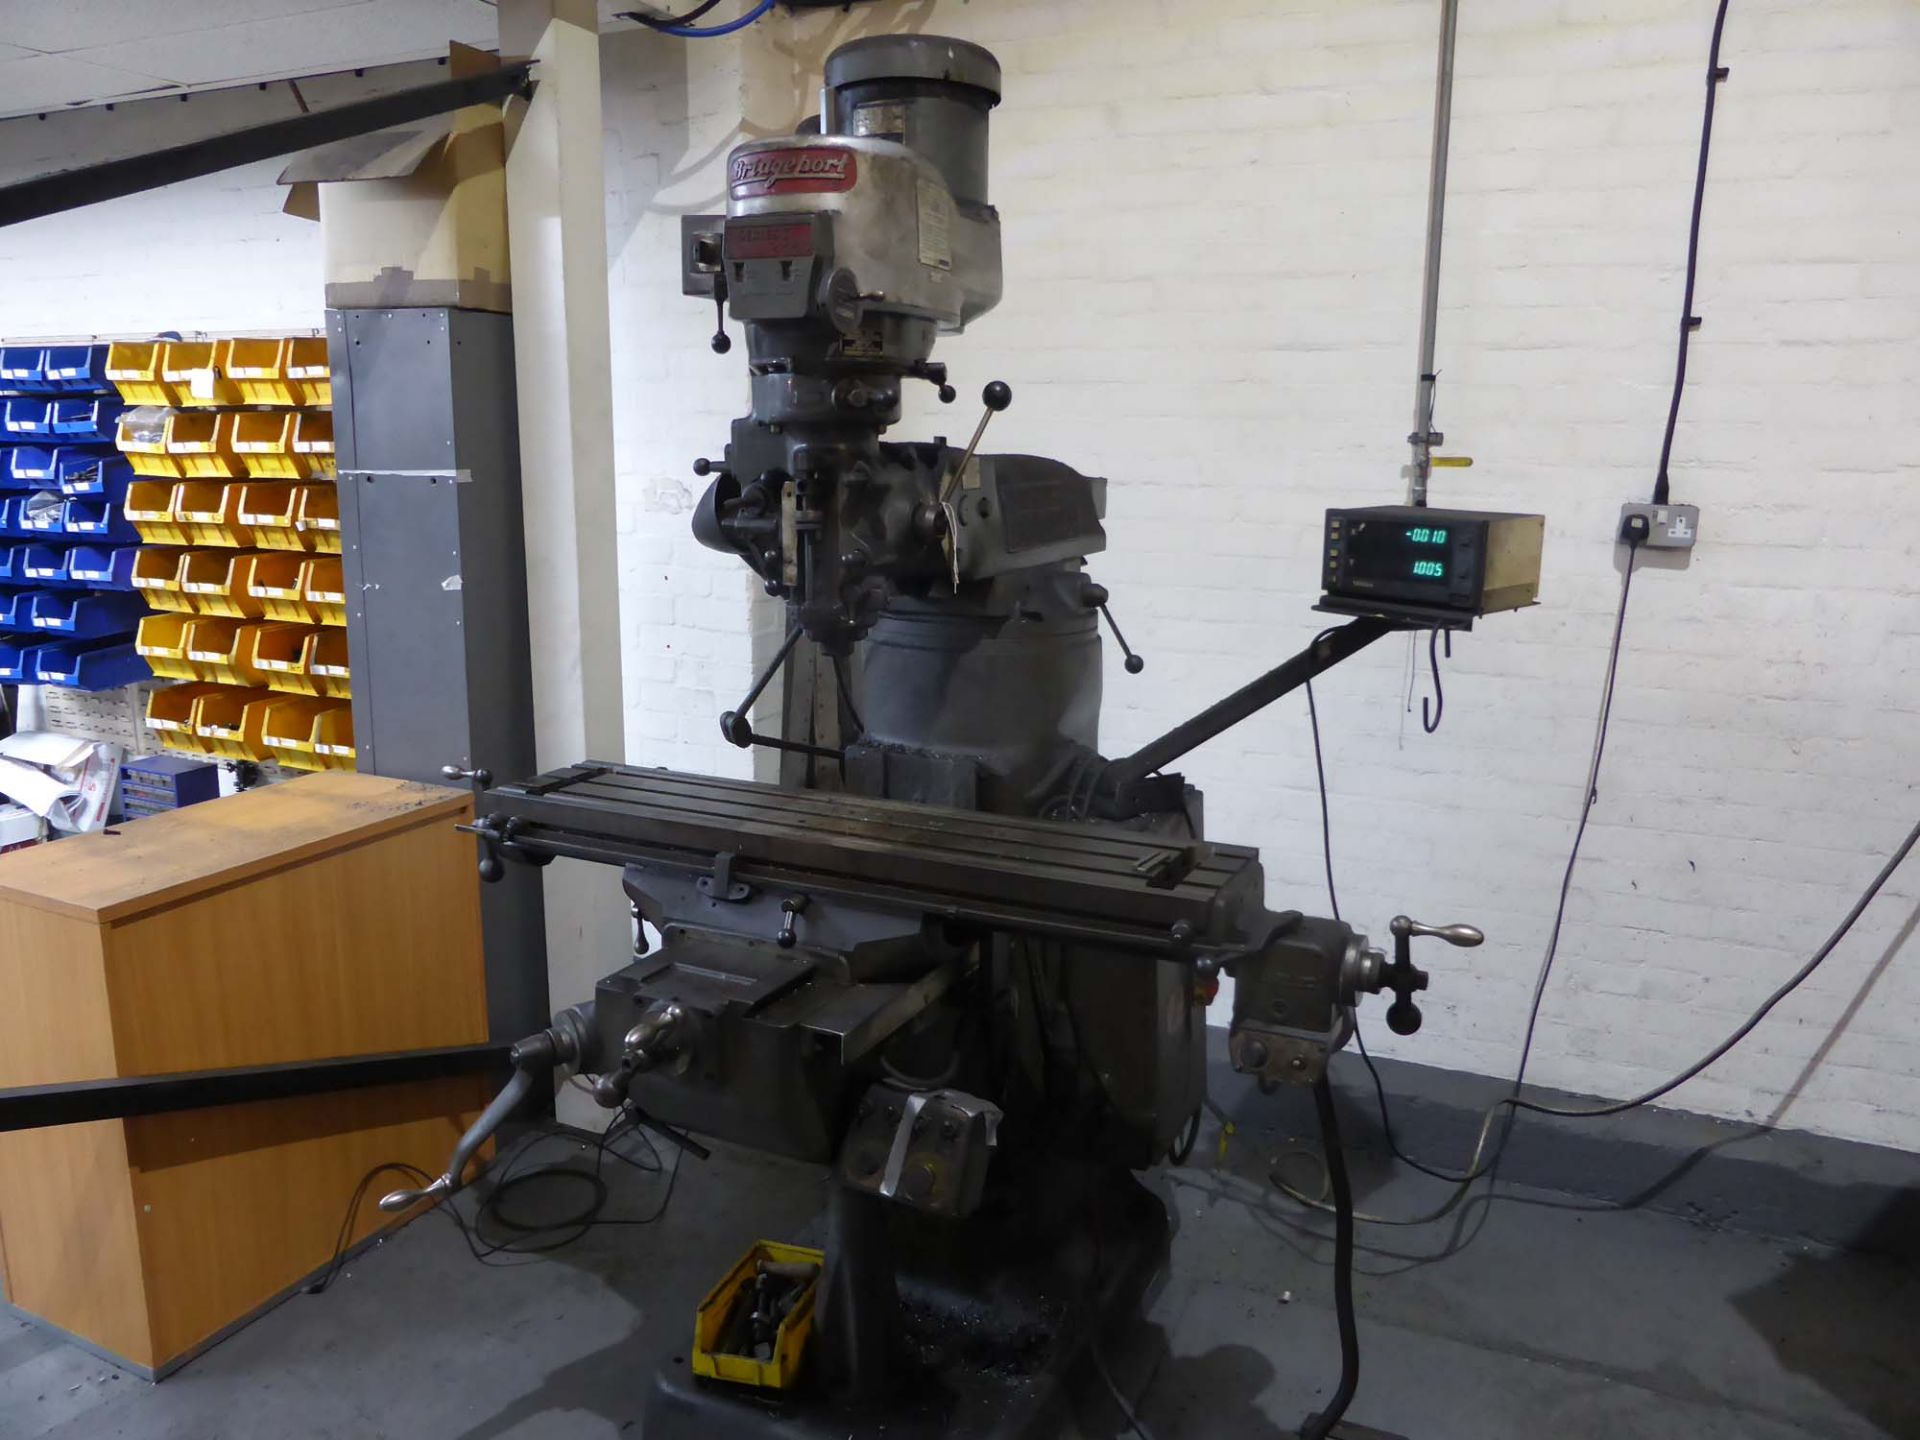 Bridgeport Series 1 2HP turret milling machine with powered table, Mitutoyo 2 axis DRO